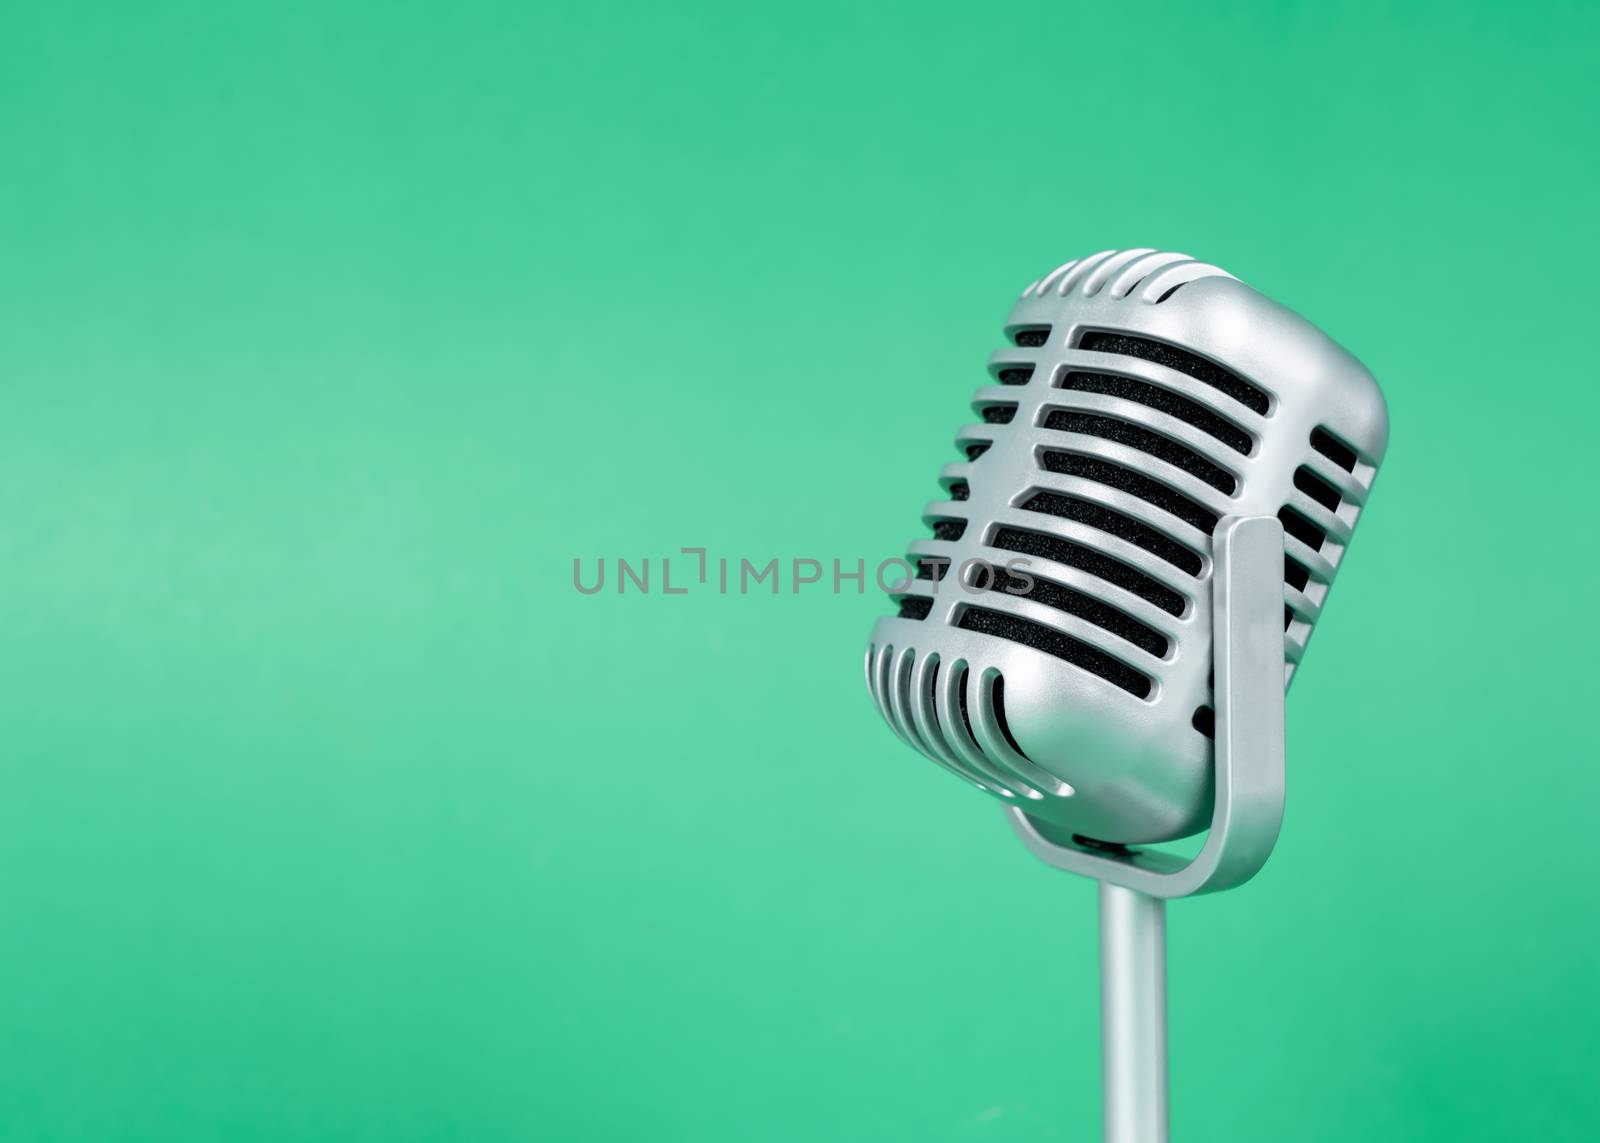 Retro microphone with copy space on green background